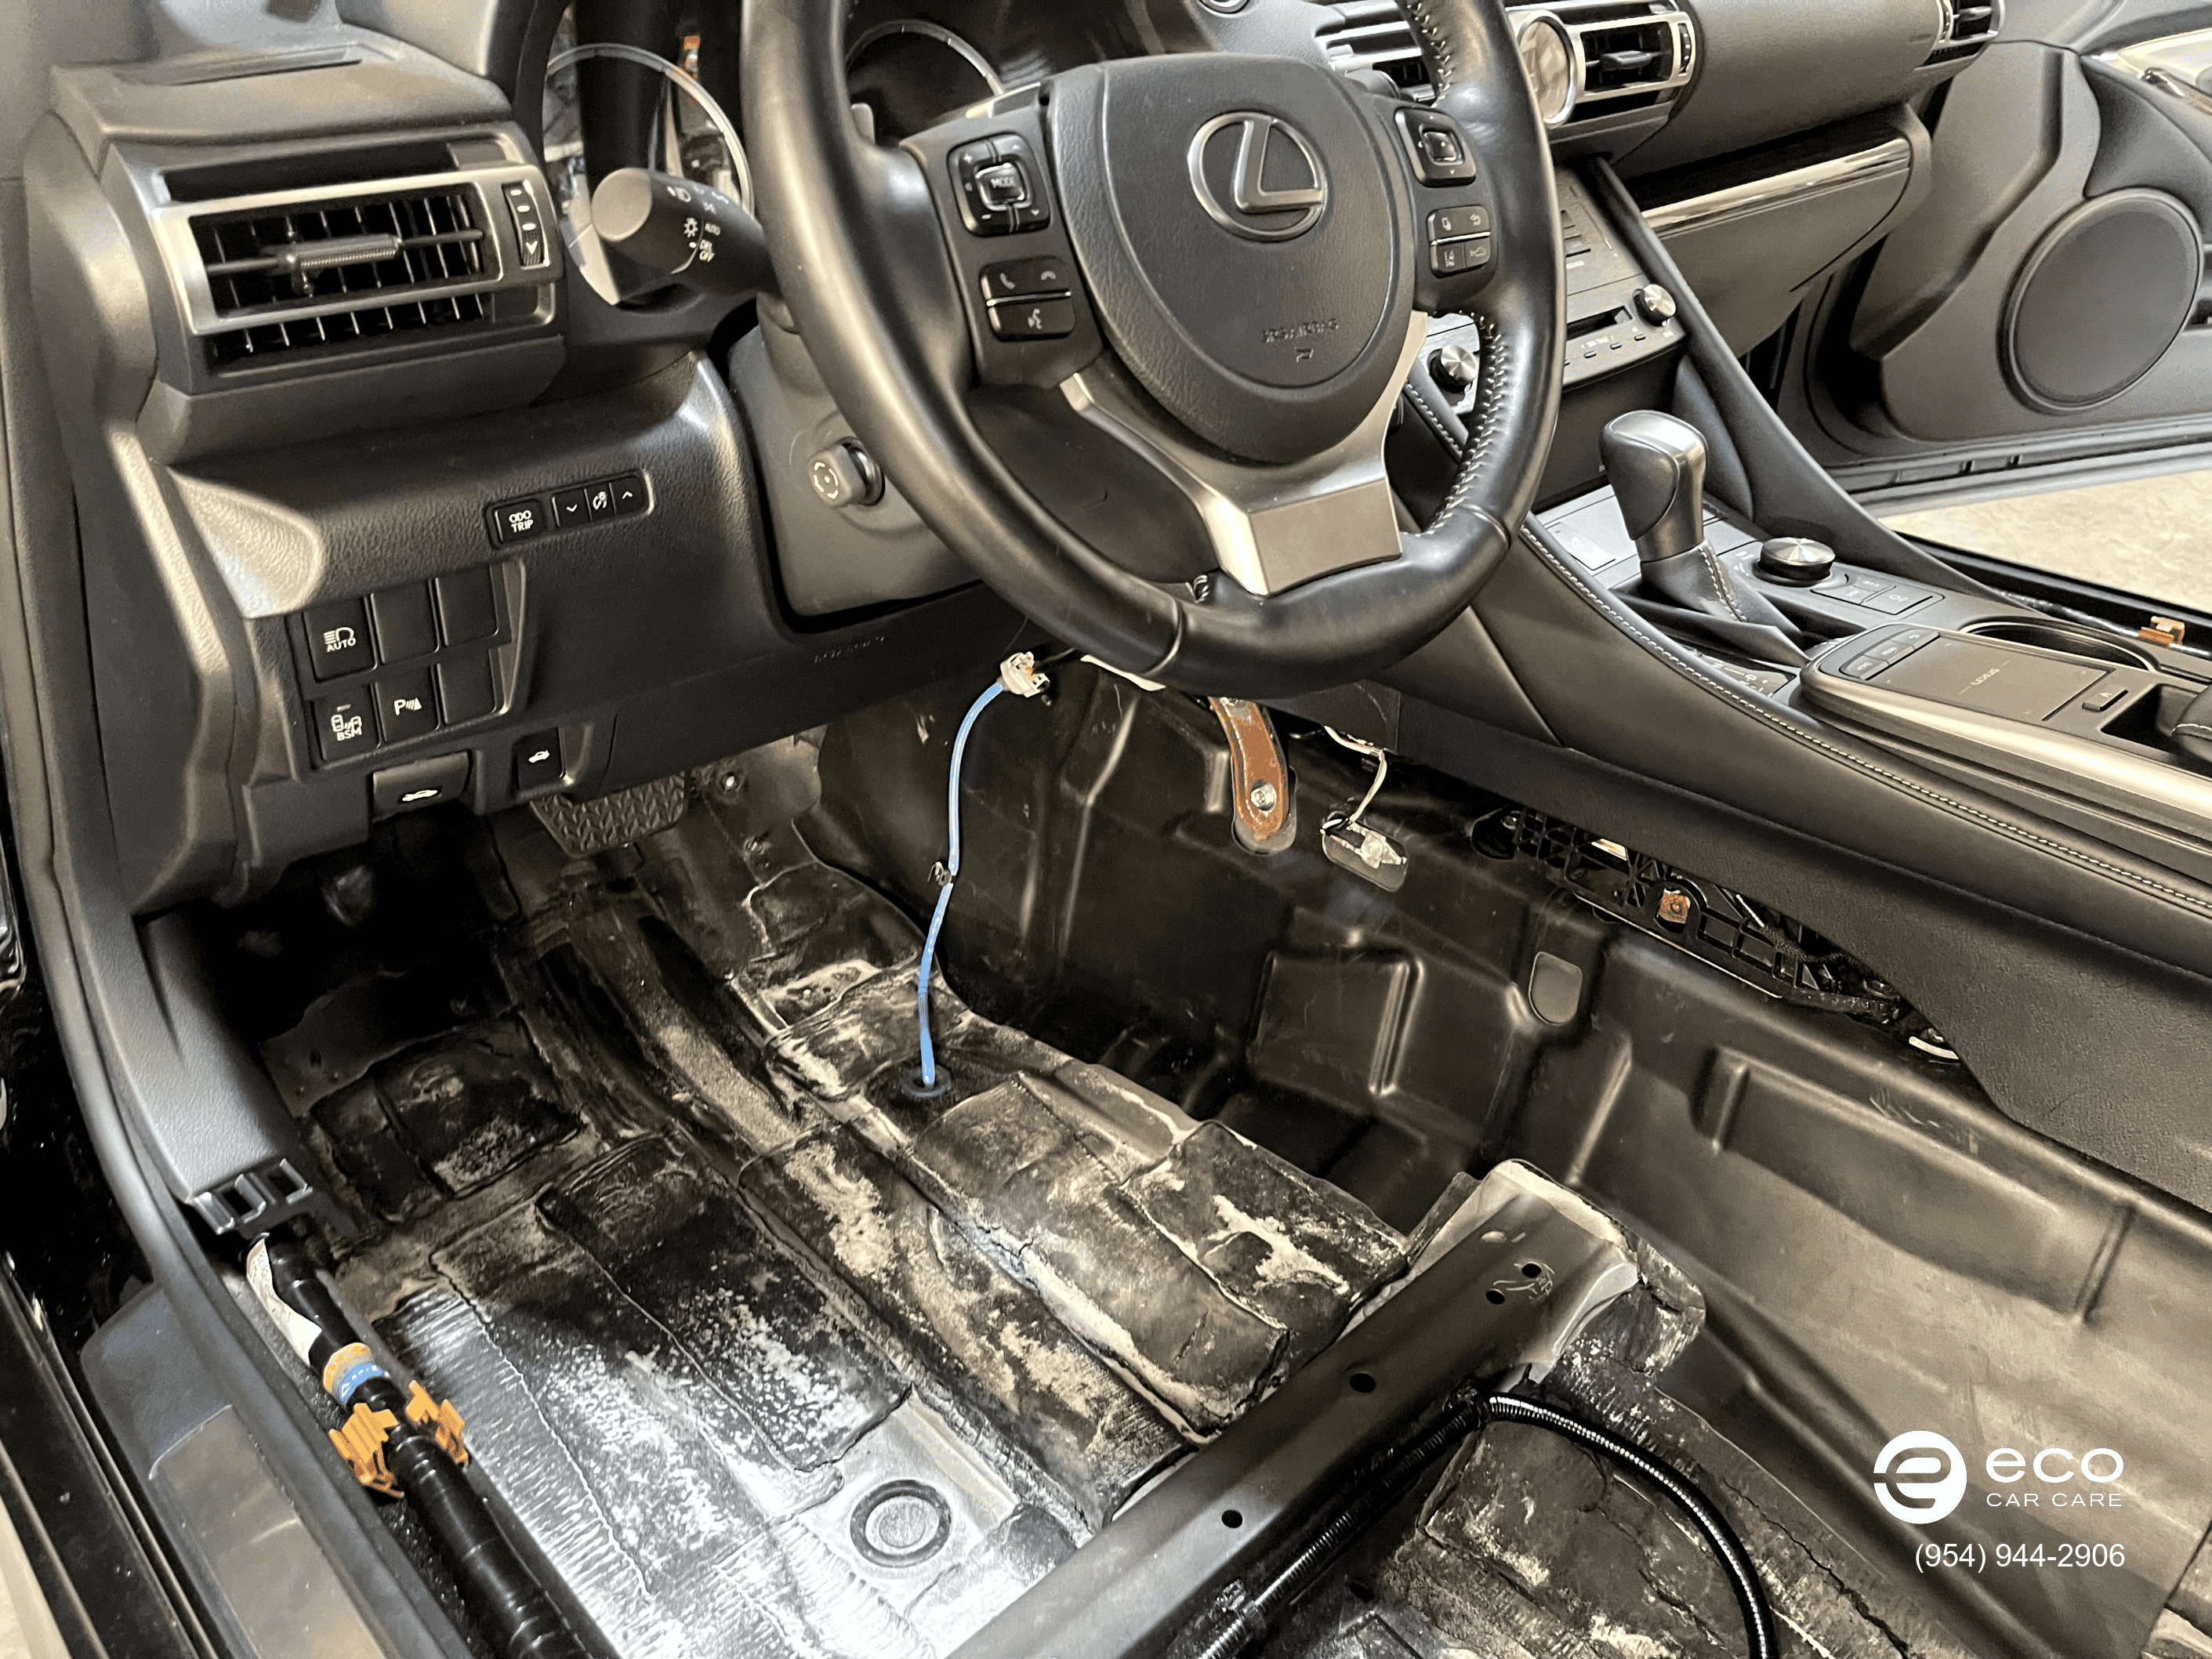 car mold removal